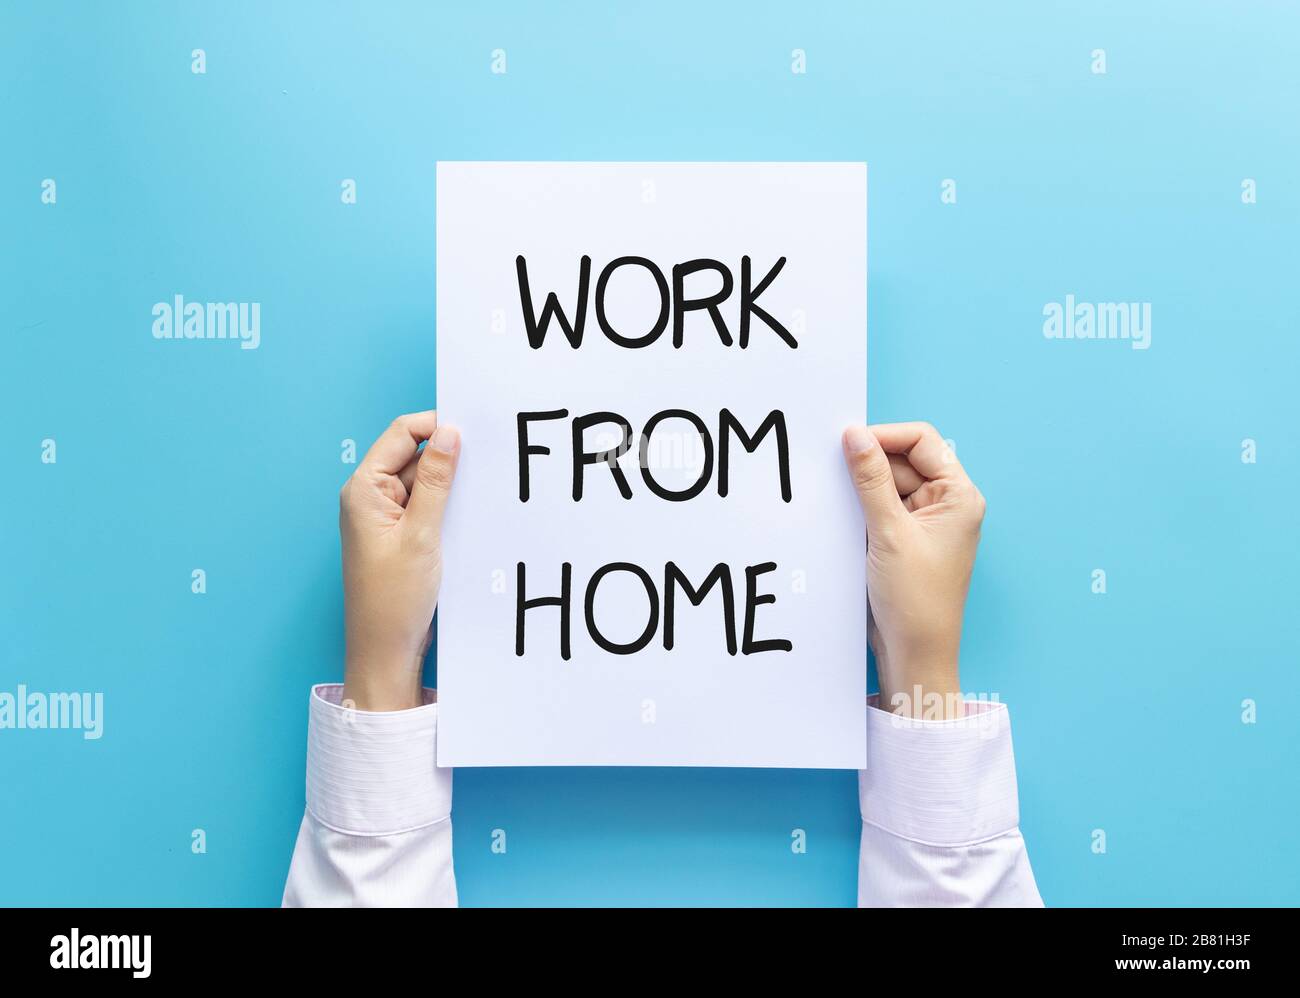 work from home concept. woman hand holding paper with word work from home isolated on blue background, studio shot. Stock Photo